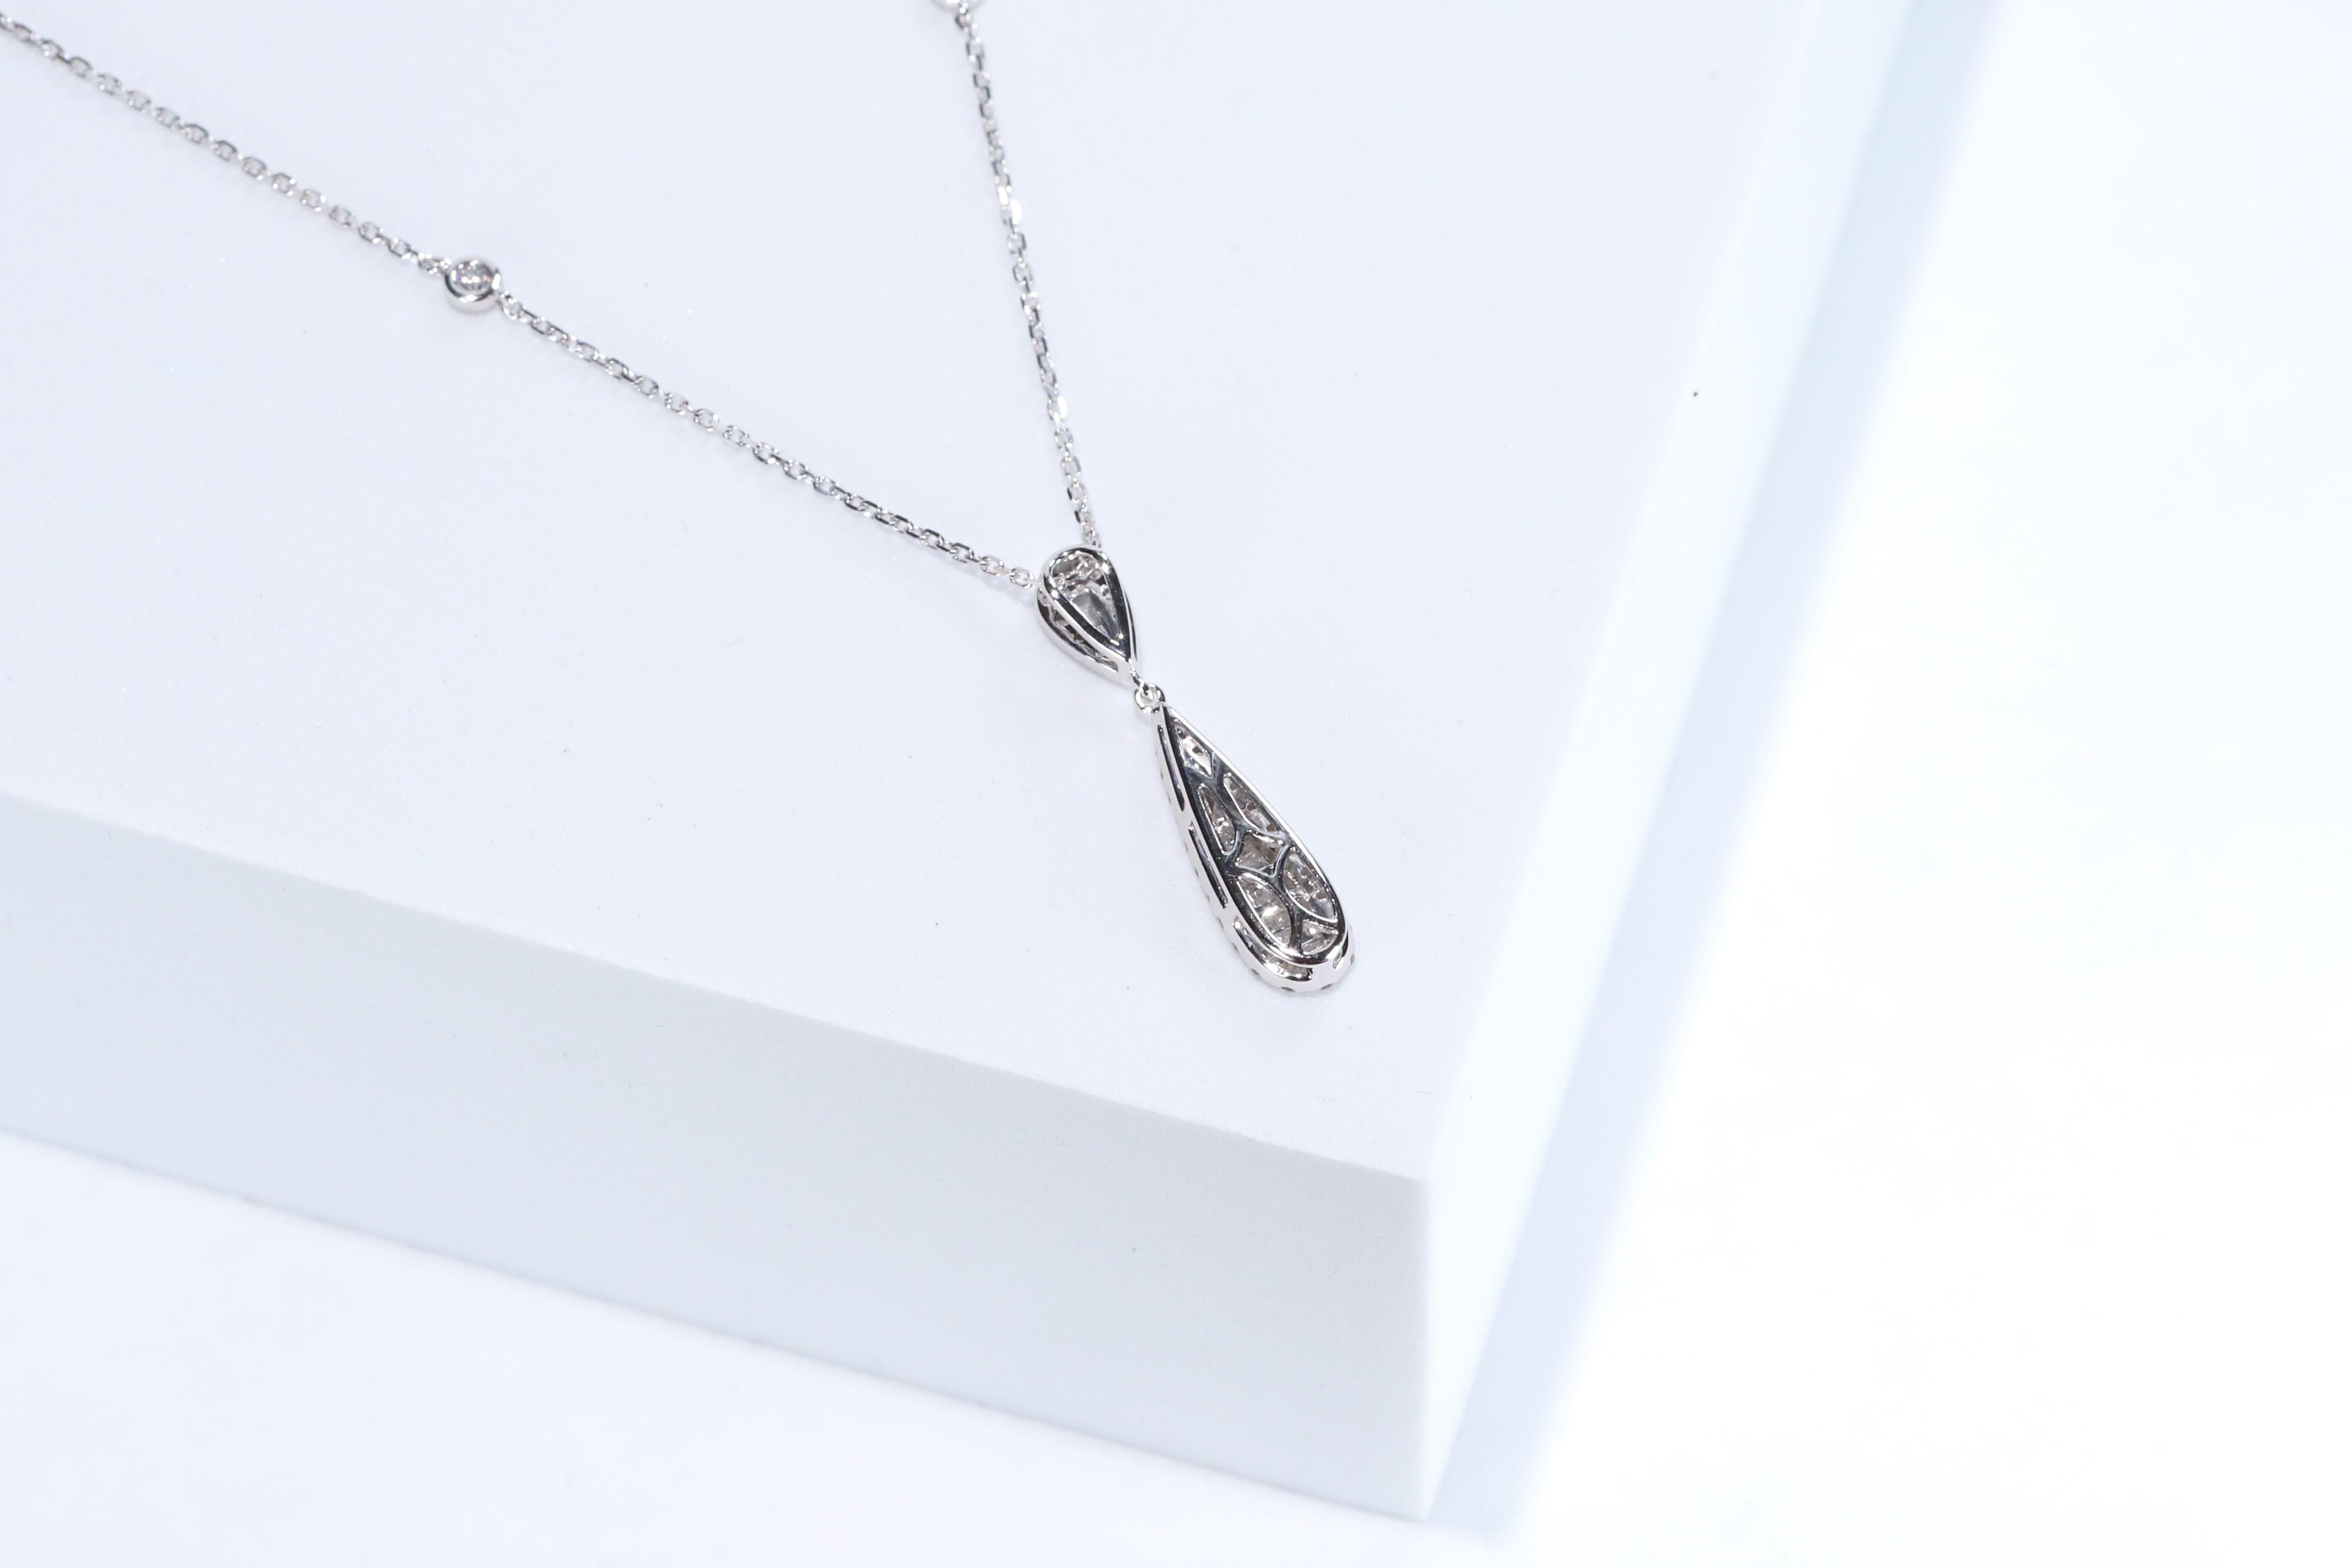 Decorate yourself in elegance with this Pendant is crafted from 14-karat White Gold by Gin & Grace. This Pendant is made up of Round-cut White Diamond (36 Pcs) 0.32 Carat, Baguette-cut White Diamond (10 pcs) 0.19 carat. This Pendant is weight 2.93